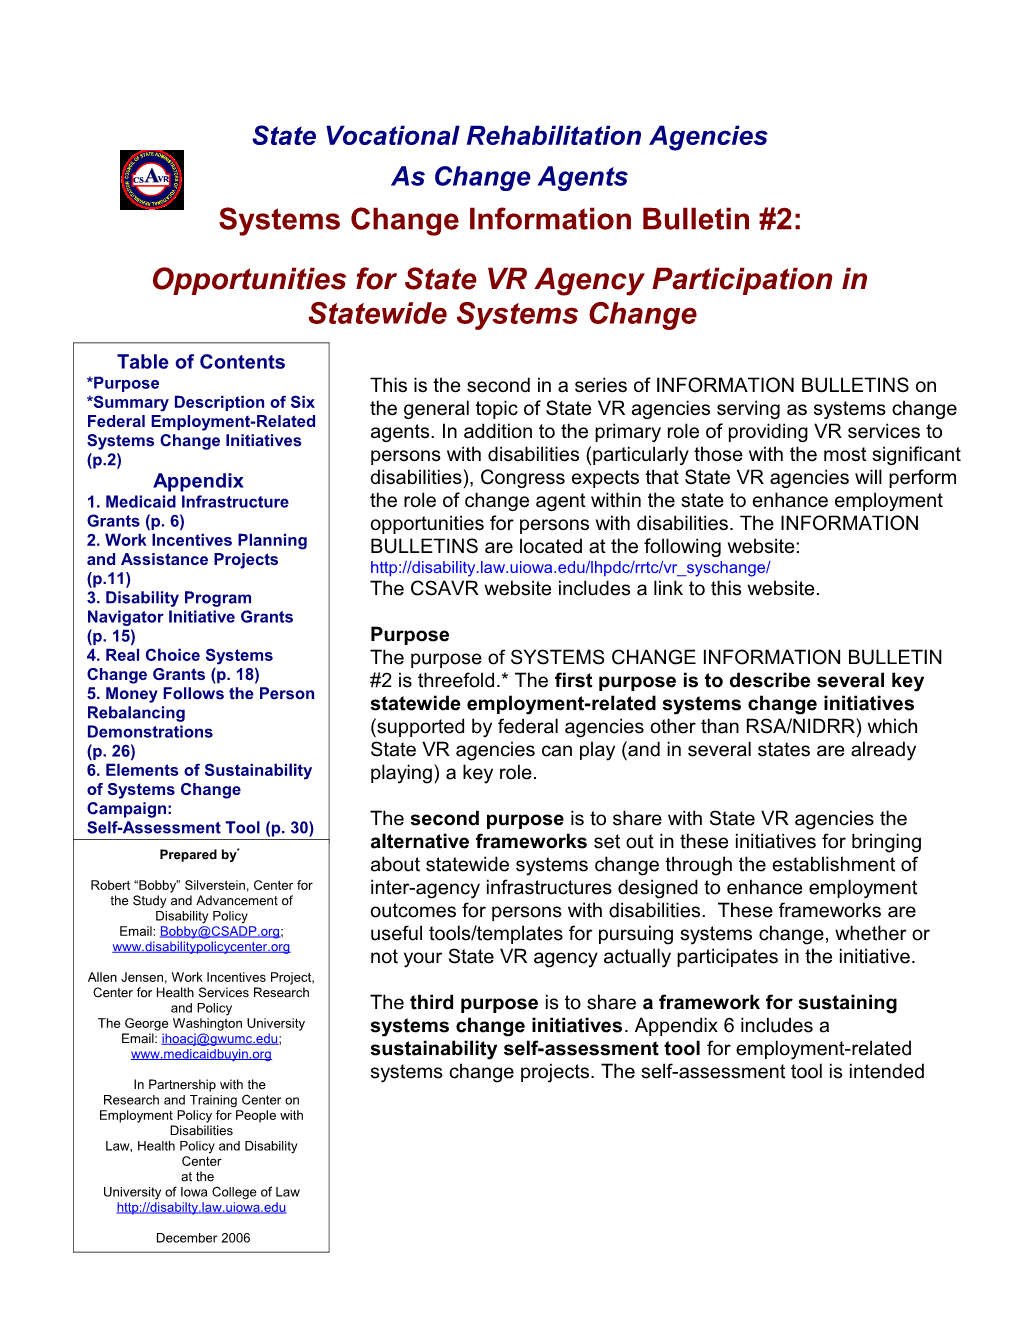 Systems Change Information Bulletin #2